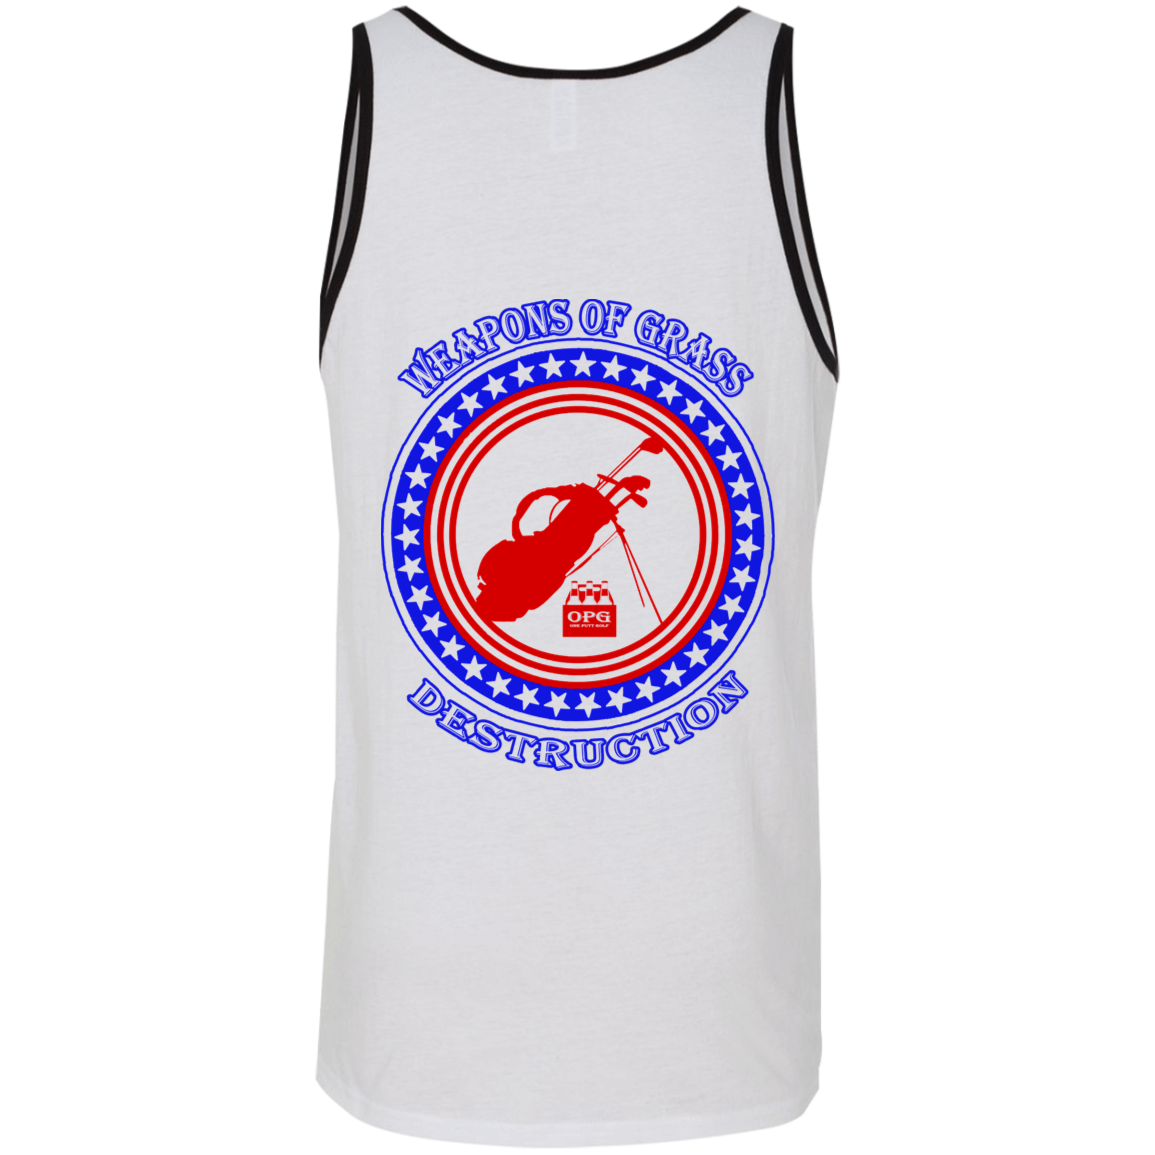 OPG Custom Design #18. Weapons of Grass Destruction. 2 Tone Tank 100% Combed and Ringspun Cotton